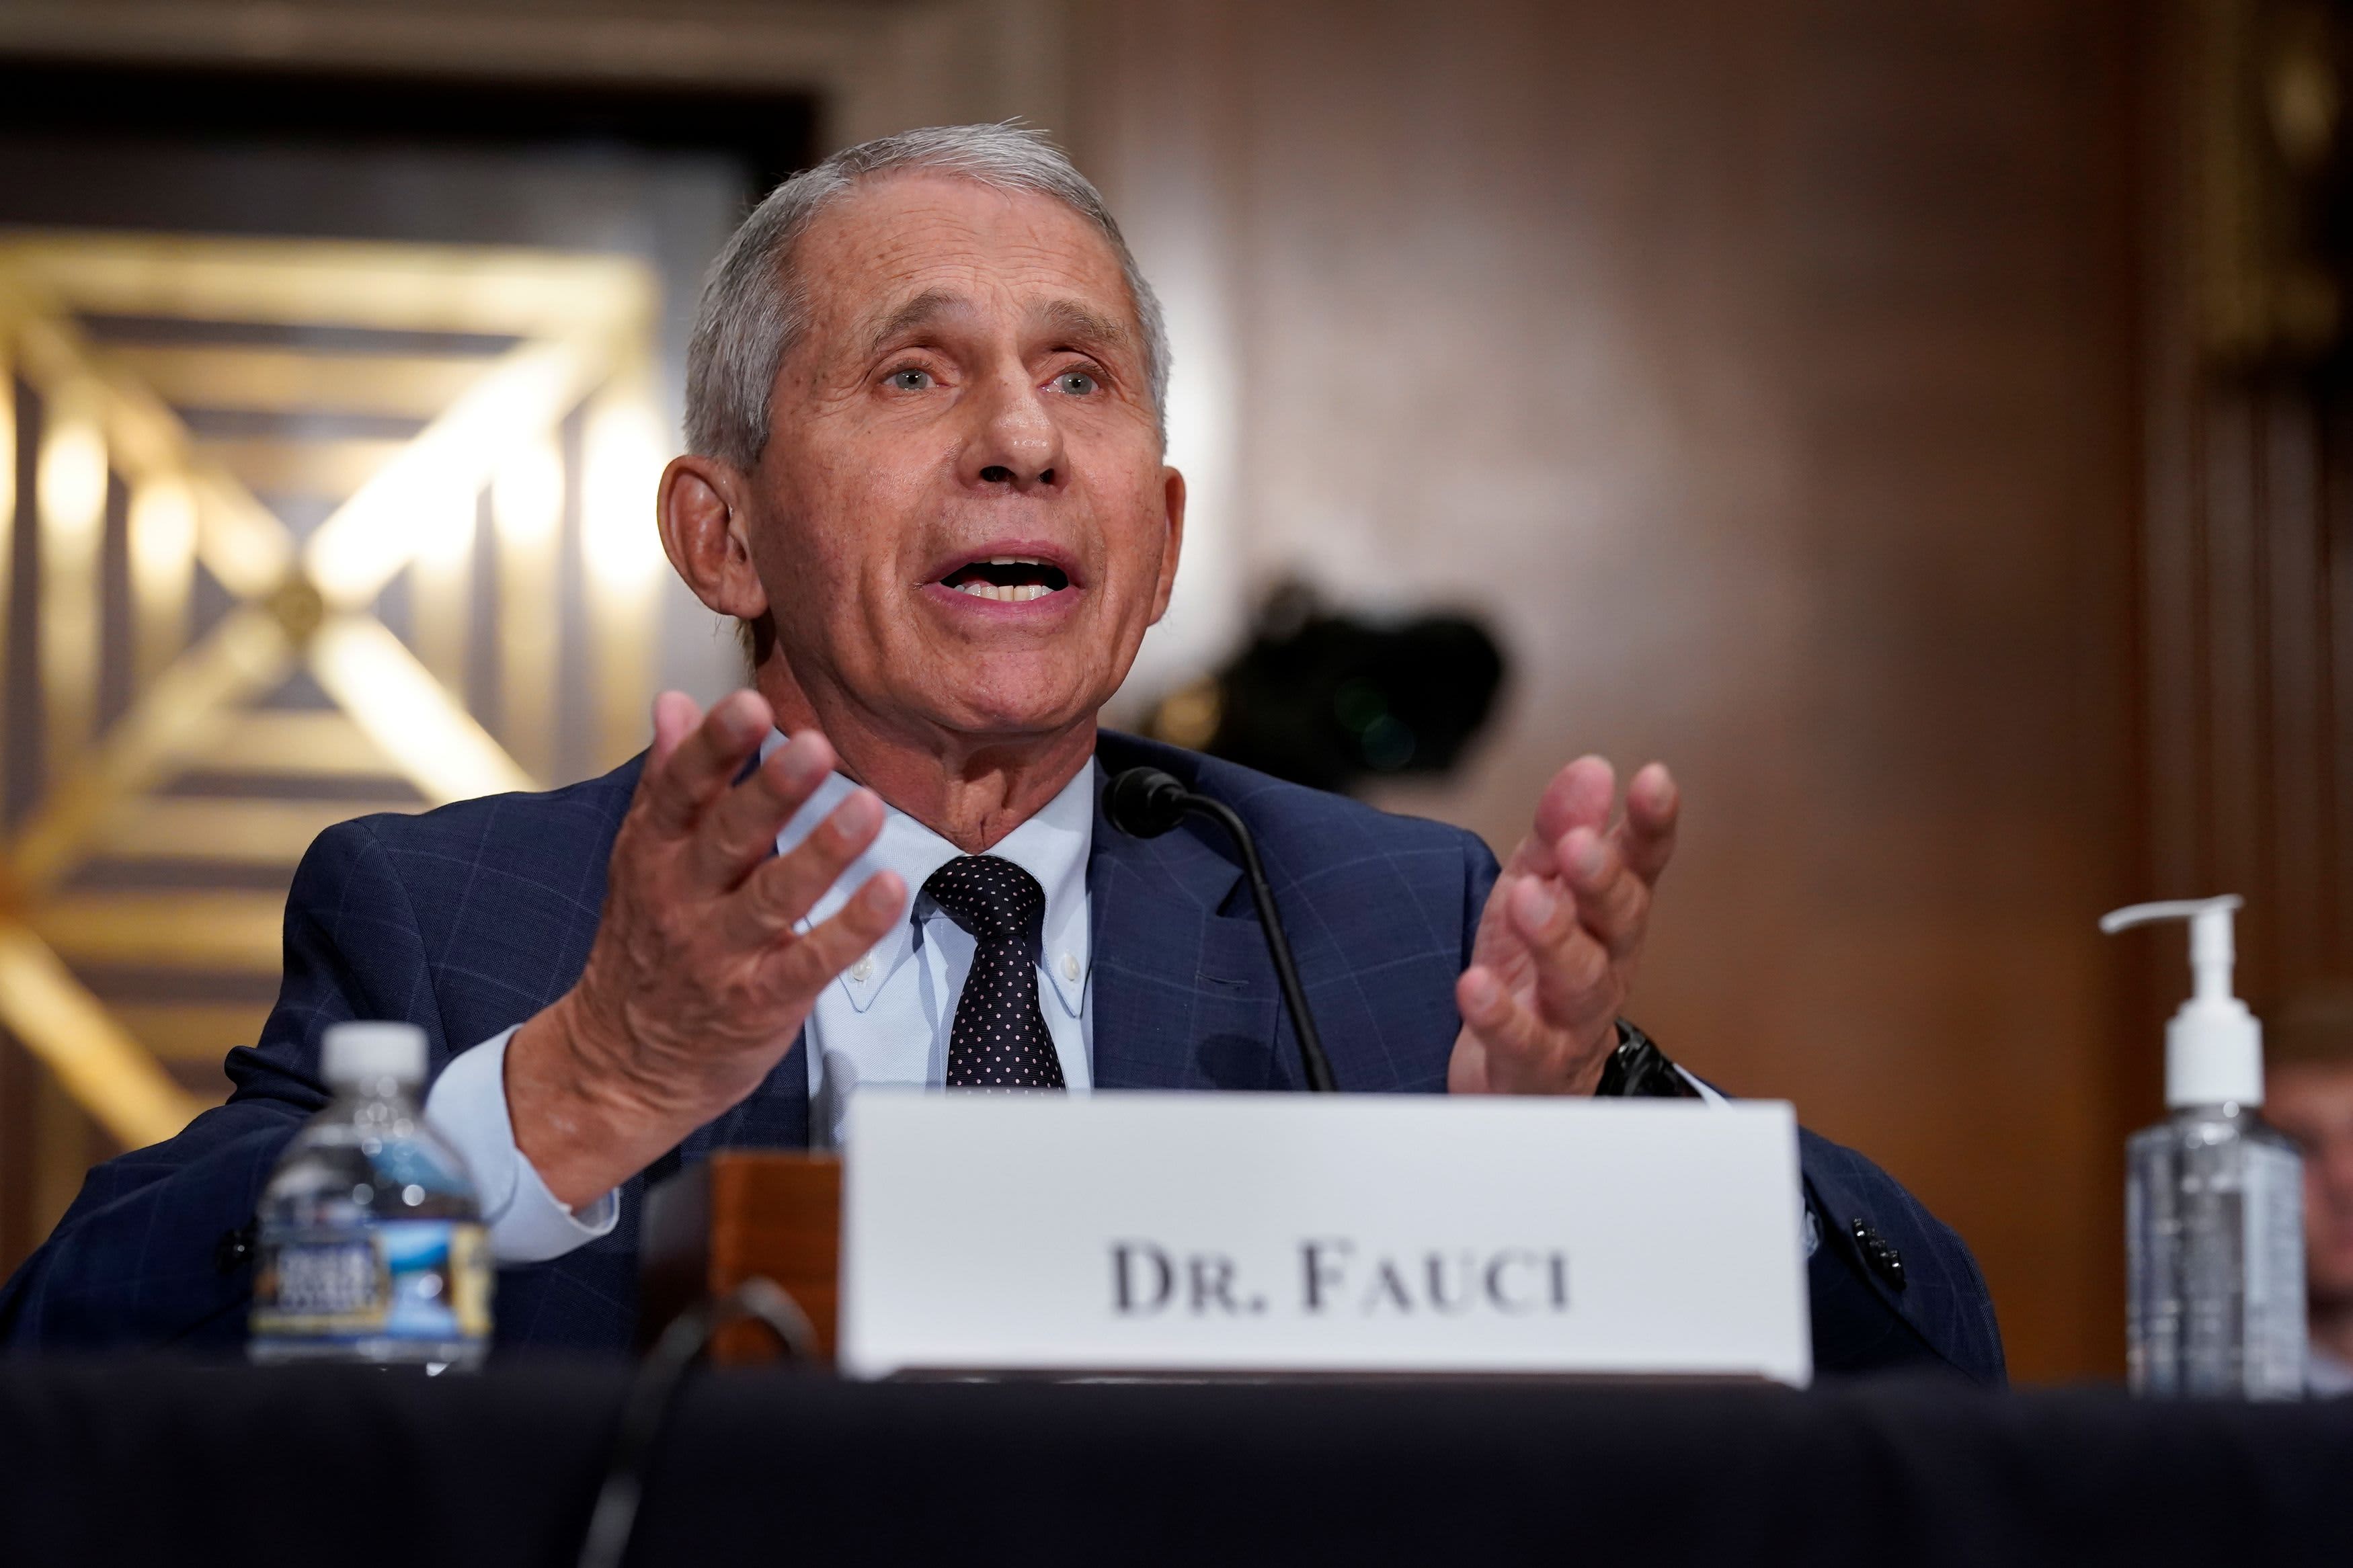 Pfizer Covid booster shots will likely be ready Sept. 20, but Moderna may be delayed, Fauci says